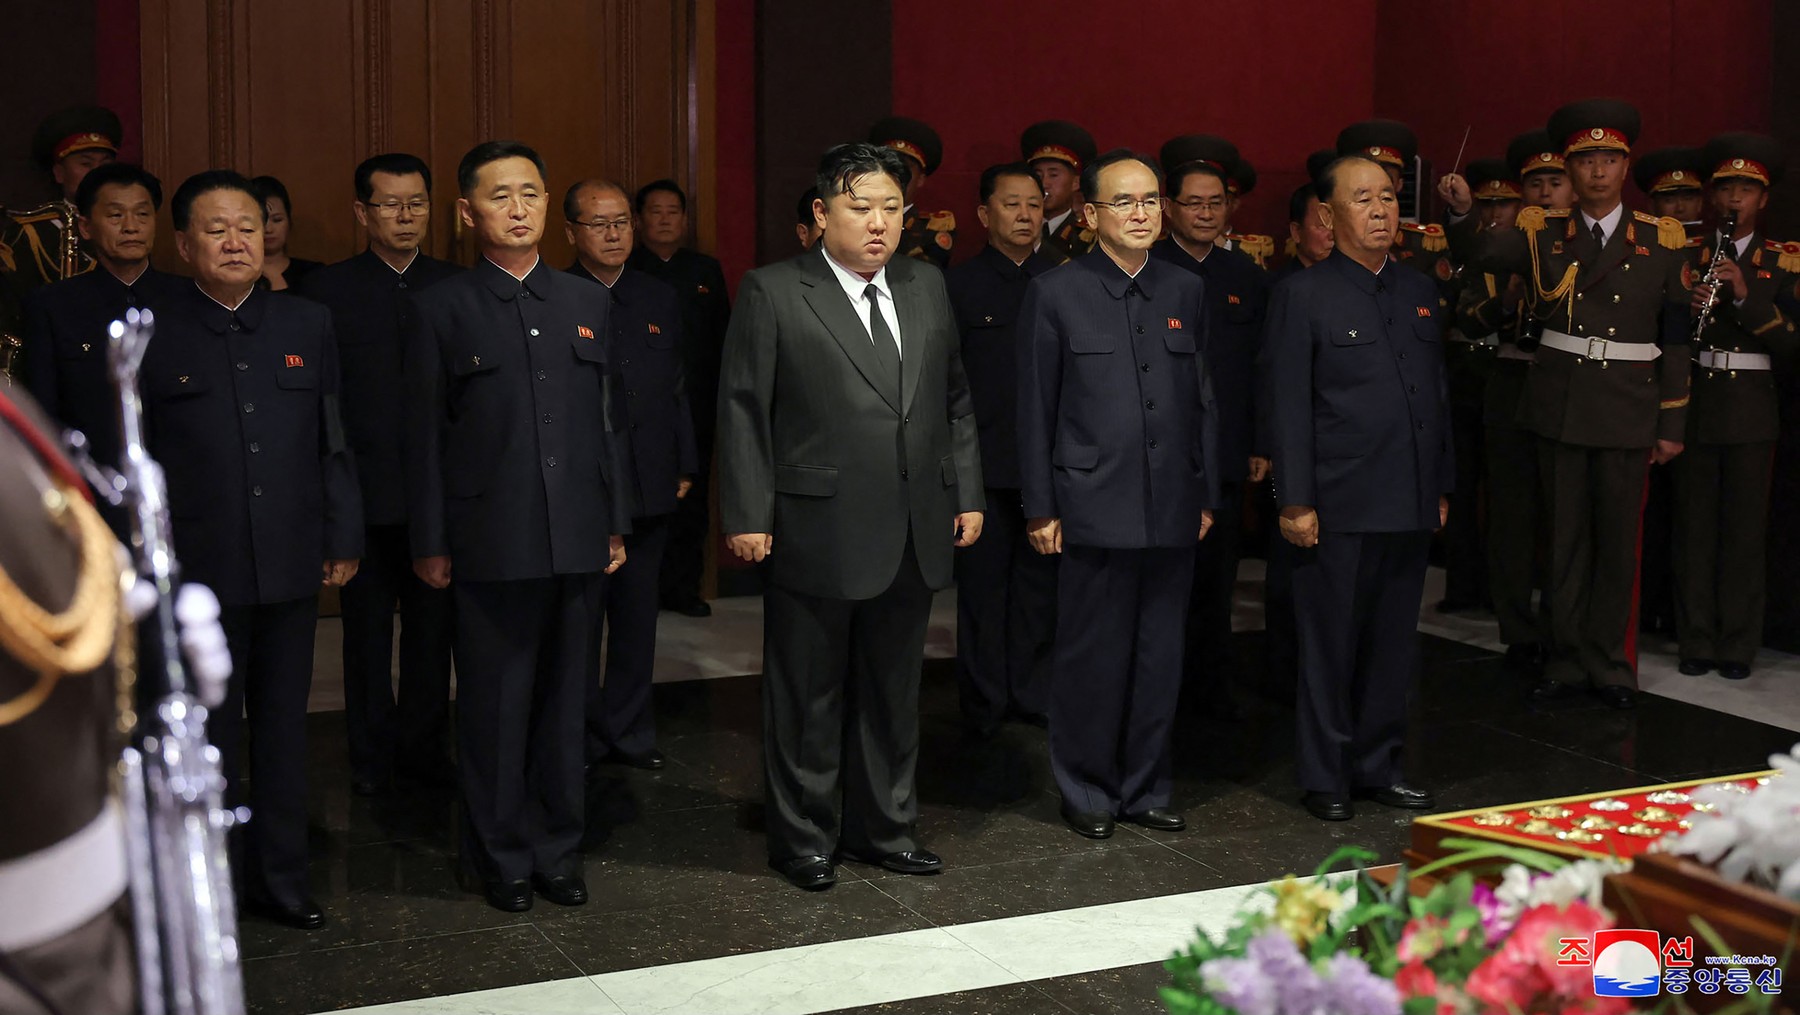 This picture taken and released on May 8, 2024 from North Korea's official Korean Central News Agency (KCNA) via KNS shows North Korea's leader Kim Jong Un (C) and senior officials expressing their condolences to former Workers' Party of Korea Vice Chairman Kim Ki Nam, who died at the age of 94 on May 7, during a service in Pyongyang. North Korea's former propaganda chief, credited with masterminding the personality cult surrounding the ruling Kim dynasty, has died, state media said on May 8, with leader Kim Jong Un attending his funeral.,Image: 871029888, License: Rights-managed, Restrictions: South Korea OUT / REPUBLIC OF KOREA OUT
---EDITORS NOTE--- RESTRICTED TO EDITORIAL USE - MANDATORY CREDIT "AFP PHOTO/KCNA VIA KNS" - NO MARKETING NO ADVERTISING CAMPAIGNS - DISTRIBUTED AS A SERVICE TO CLIENTS / THIS PICTURE WAS MADE AVAILABLE BY A THIRD PARTY. AFP CAN NOT INDEPENDENTLY VERIFY THE AUTHENTICITY, LOCATION, DATE AND CONTENT OF THIS IMAGE ---, ***
HANDOUT image or SOCIAL MEDIA IMAGE or FILMSTILL for EDITORIAL USE ONLY! * Please note: Fees charged by Profimedia are for the Profimedia's services only, and do not, nor are they intended to, convey to the user any ownership of Copyright or License in the material. Profimedia does not claim any ownership including but not limited to Copyright or License in the attached material. By publishing this material you (the user) expressly agree to indemnify and to hold Profimedia and its directors, shareholders and employees harmless from any loss, claims, damages, demands, expenses (including legal fees), or any causes of action or allegation against Profimedia arising out of or connected in any way with publication of the material. Profimedia does not claim any copyright or license in the attached materials. Any downloading fees charged by Profimedia are for Profimedia's services only. * Handling Fee Only 
***, Model Release: no, Credit line: STR / AFP / Profimedia